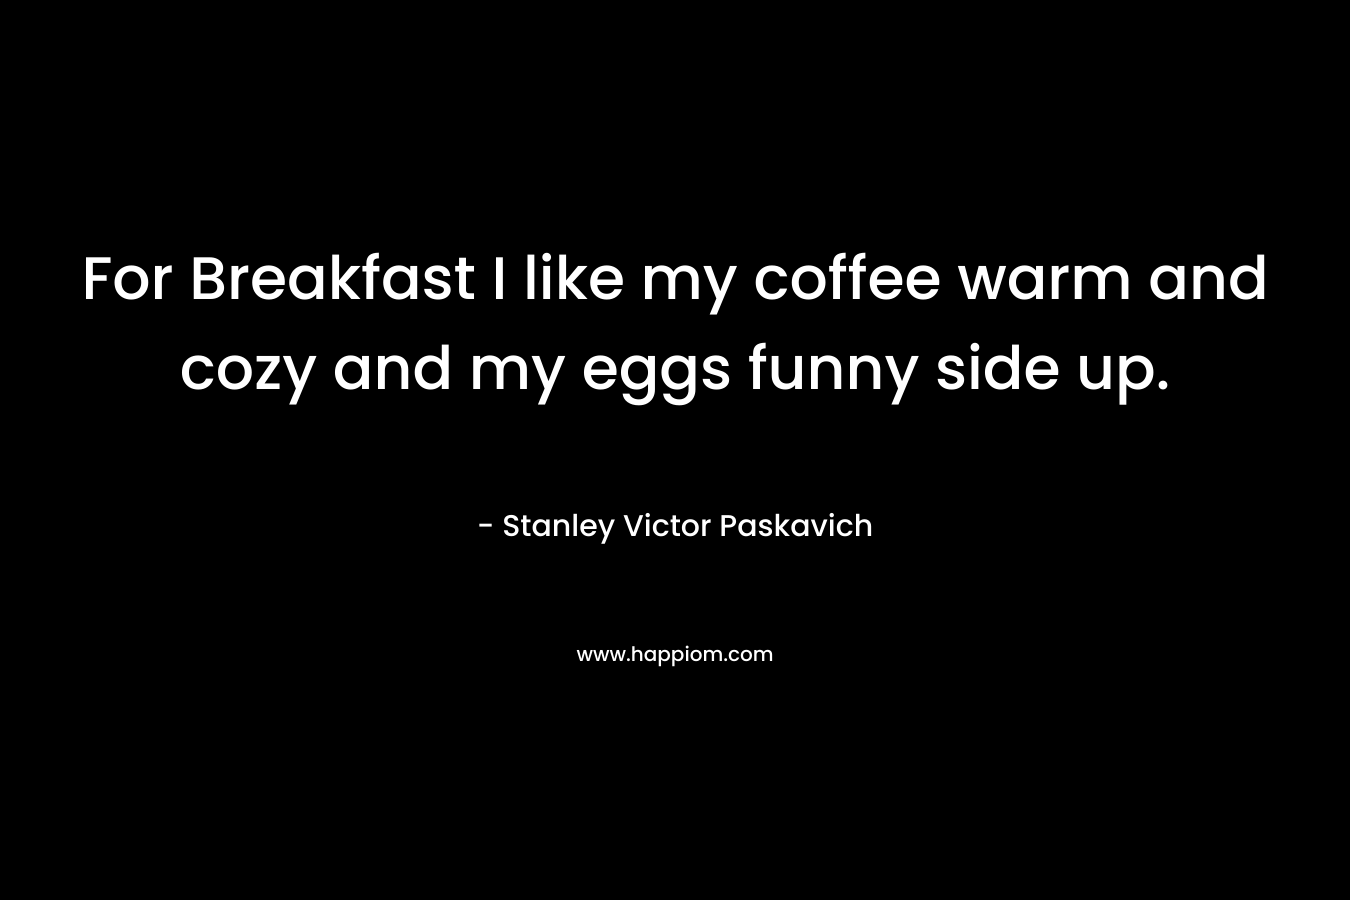 For Breakfast I like my coffee warm and cozy and my eggs funny side up. – Stanley Victor Paskavich